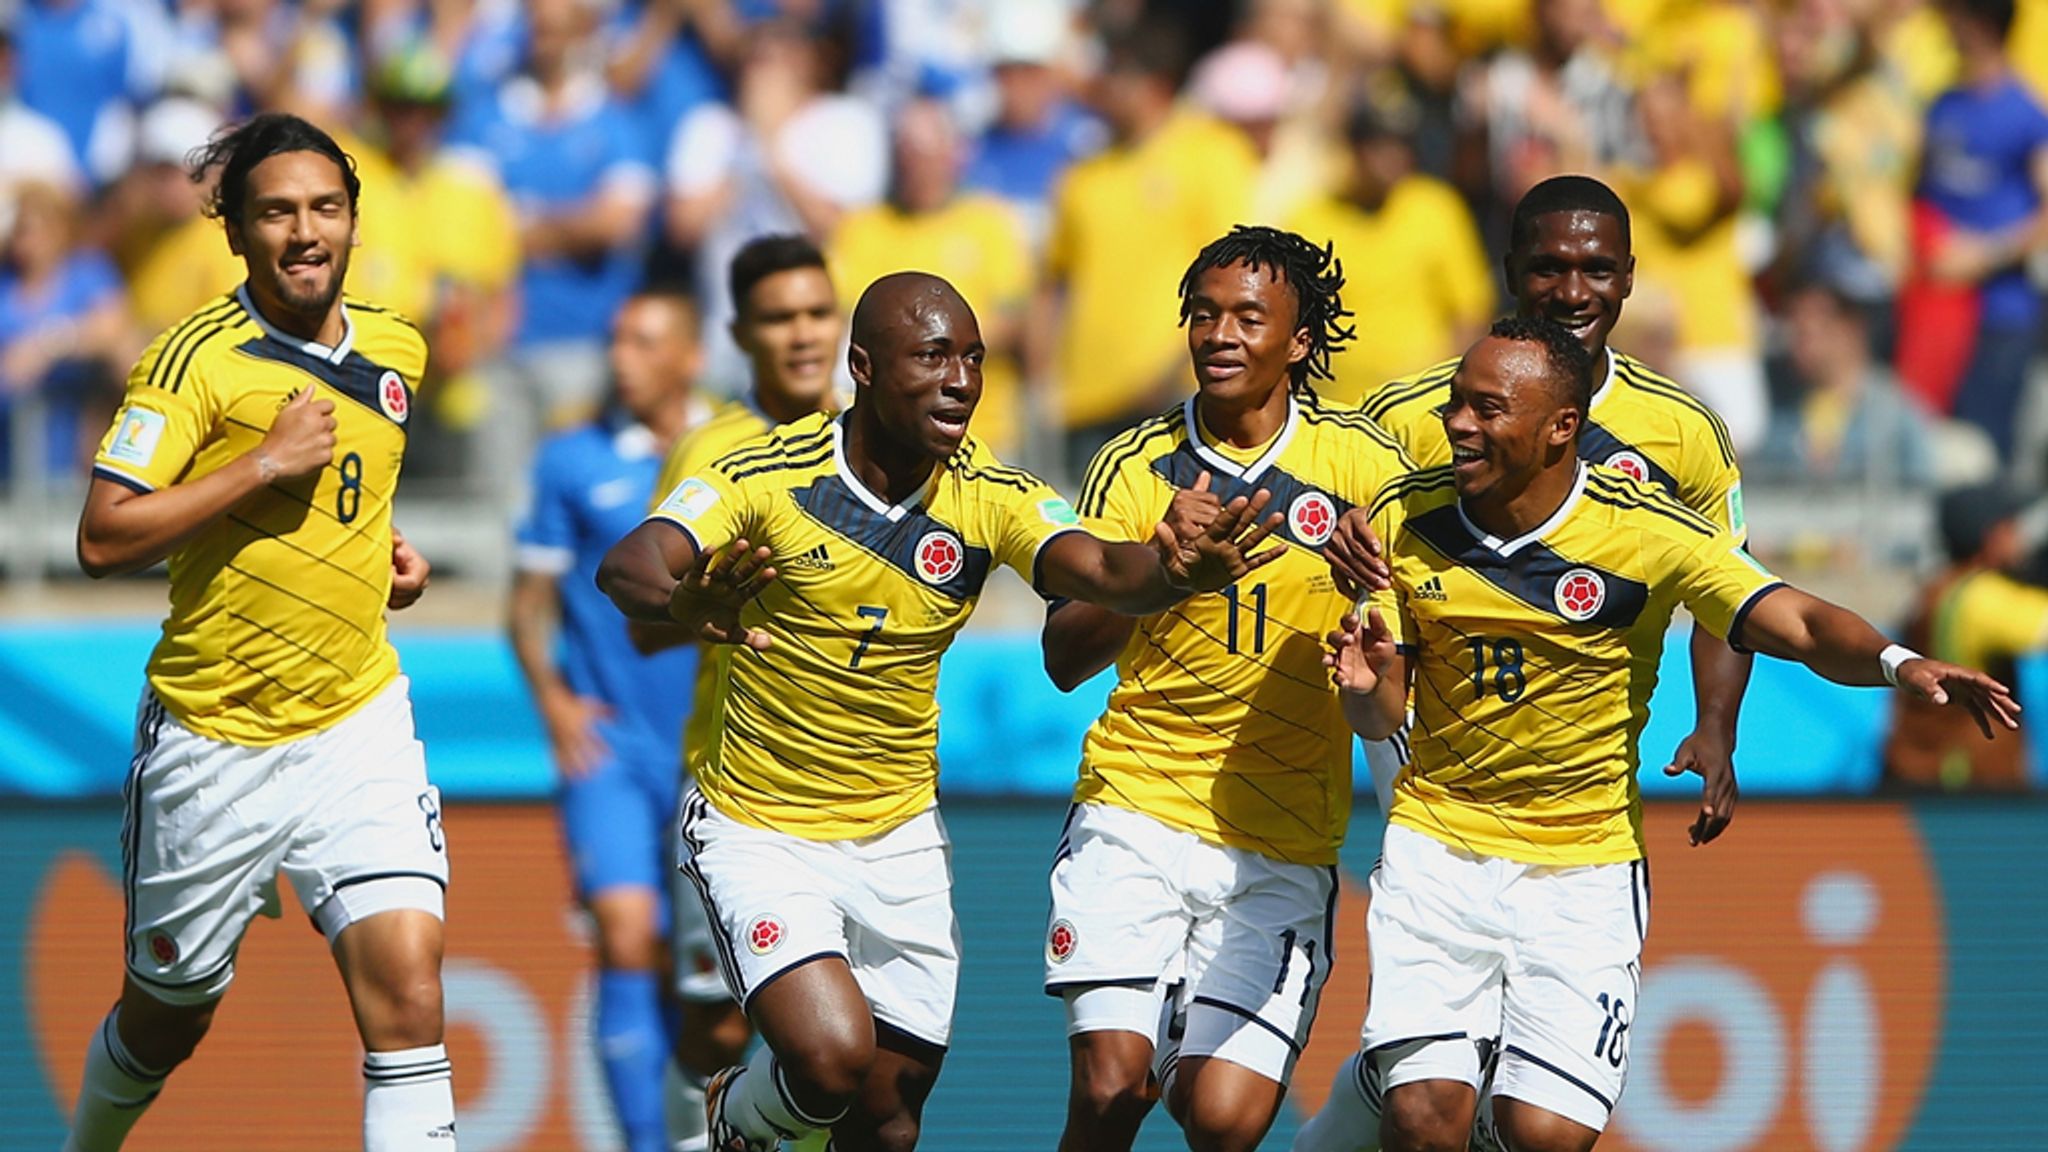 football-2014-fifa-world-cup-fifa-world-cup-2014-world-cup-fifa-world-cup-colombia_3157927.jpg